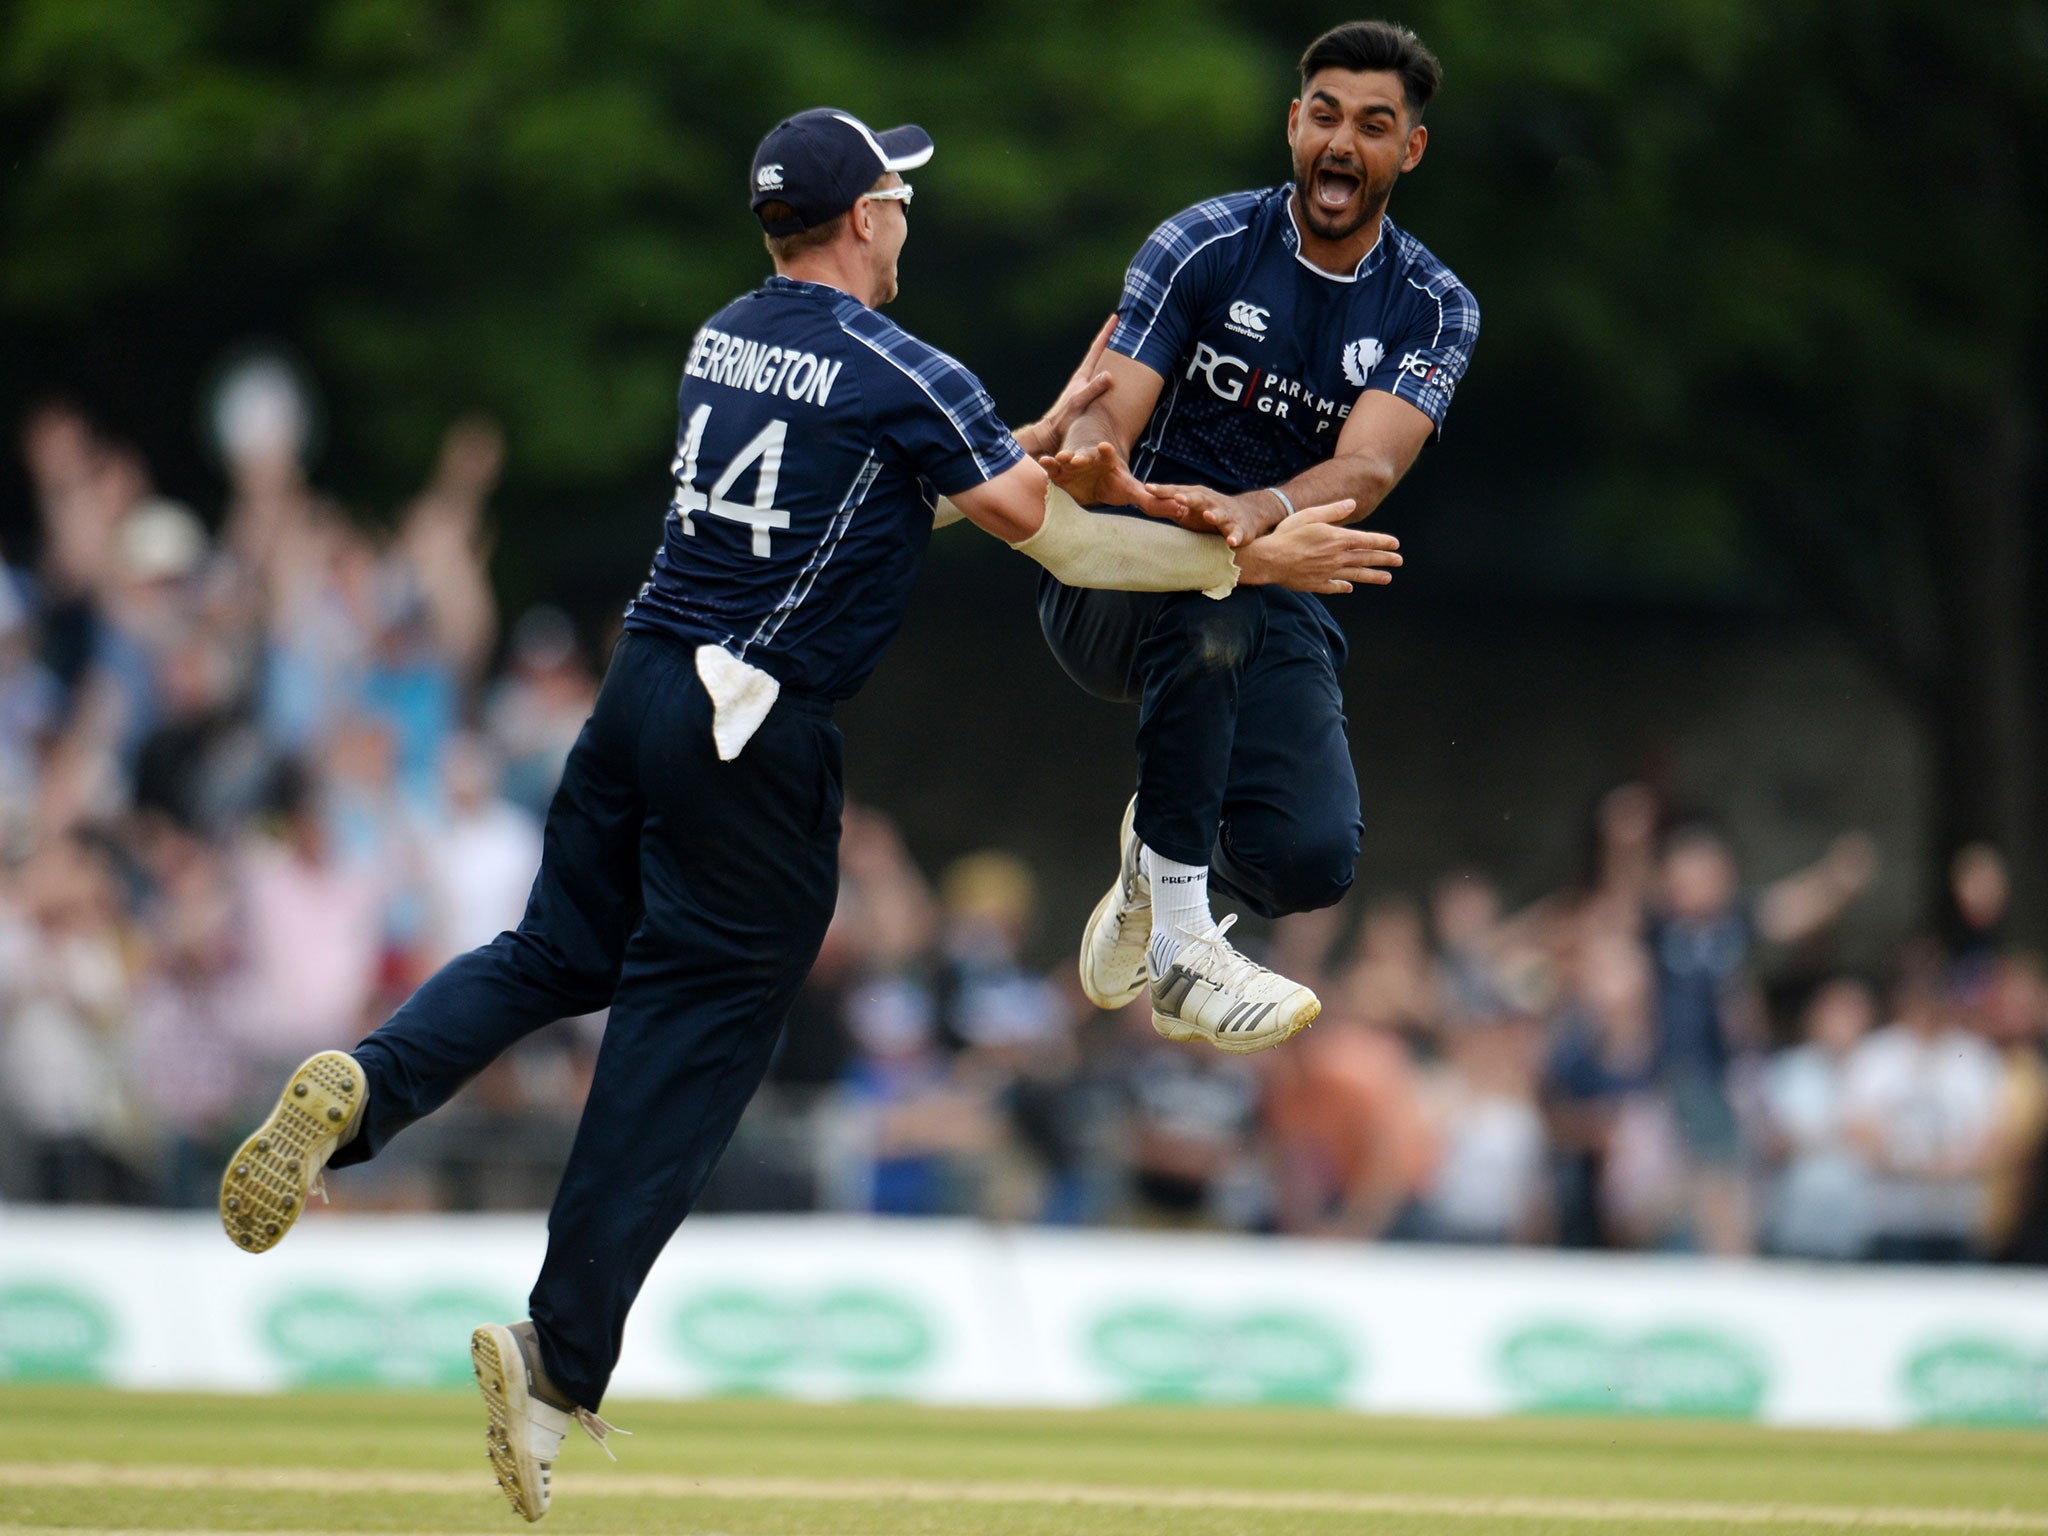 Safyaan Sharif was the man to clinch the victory, trapping Mark Wood leg before wicket in the penultimate over